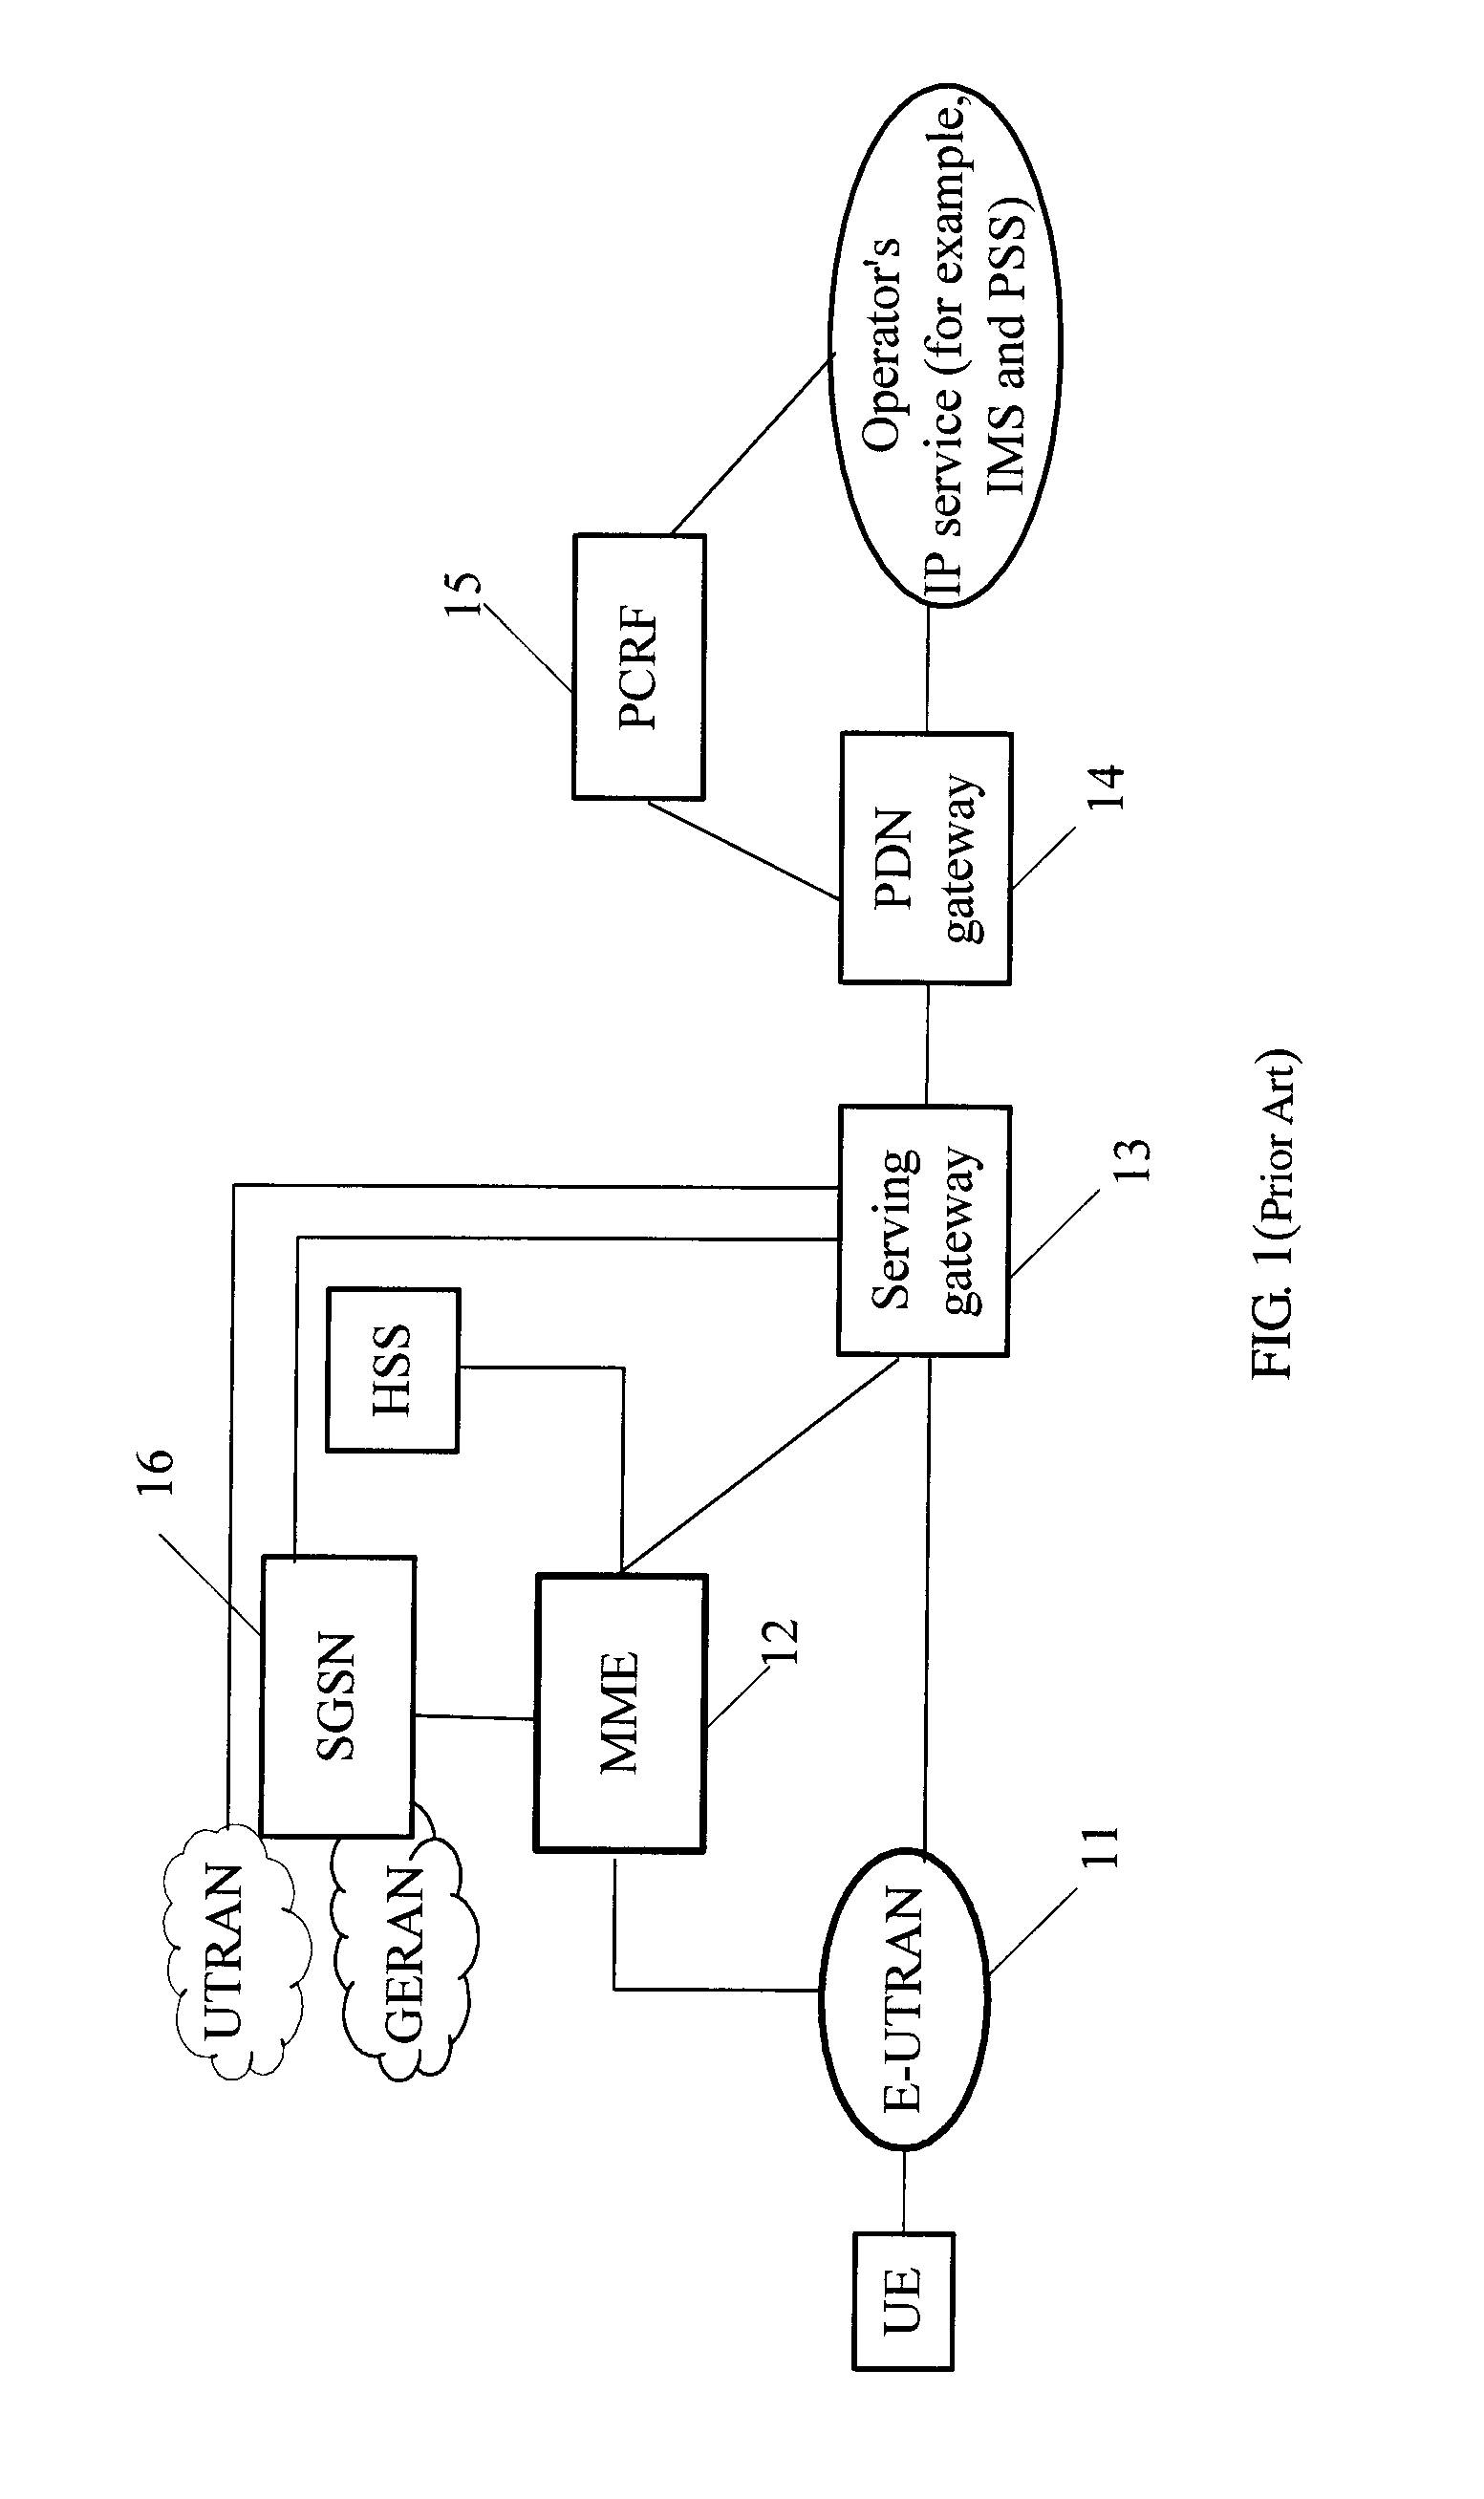 Generic access network and method for implementing services by using generic access network